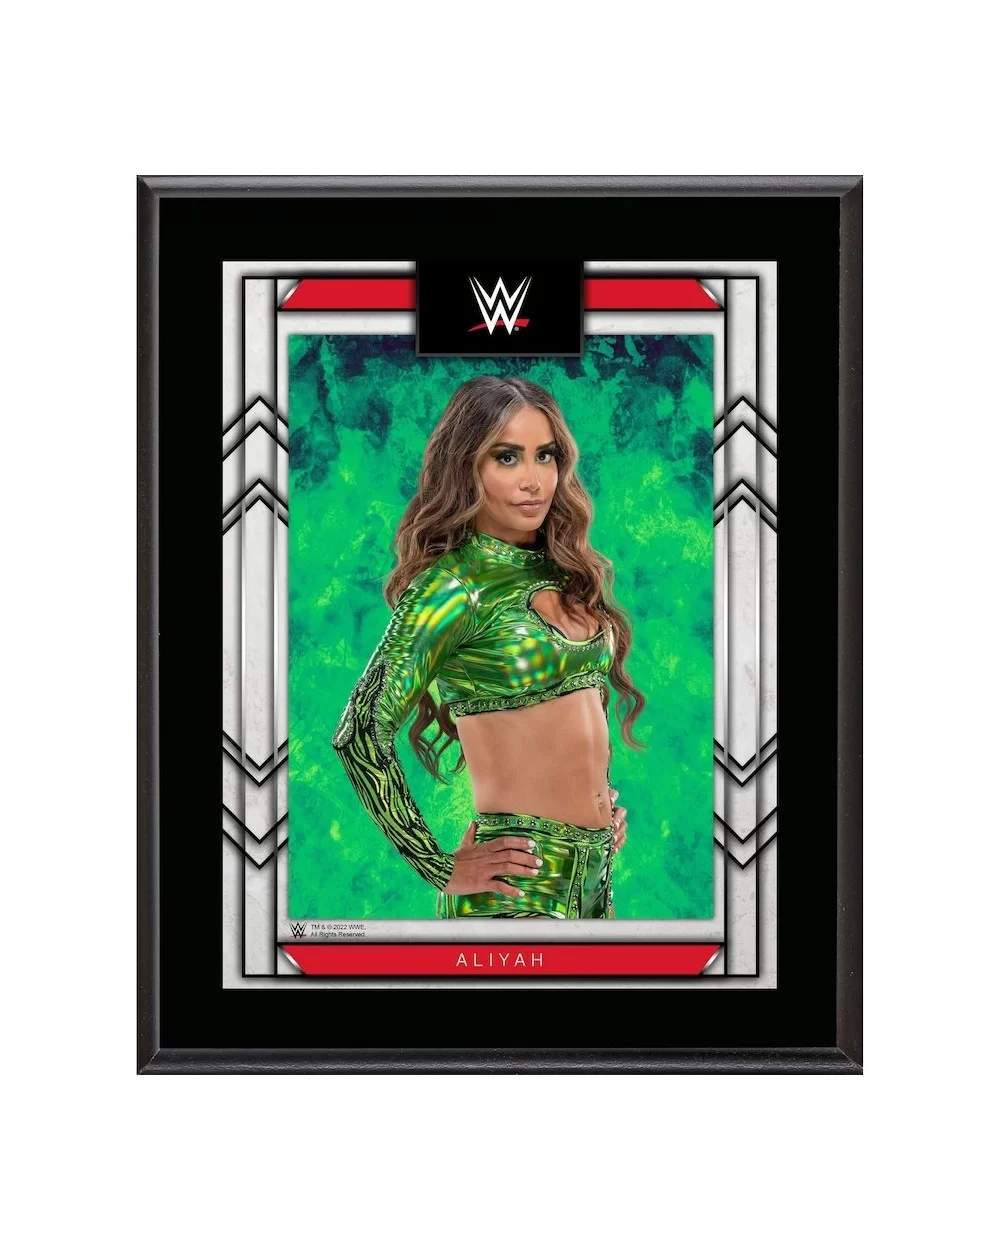 Aliyah 10.5" x 13" Sublimated Plaque $7.44 Home & Office